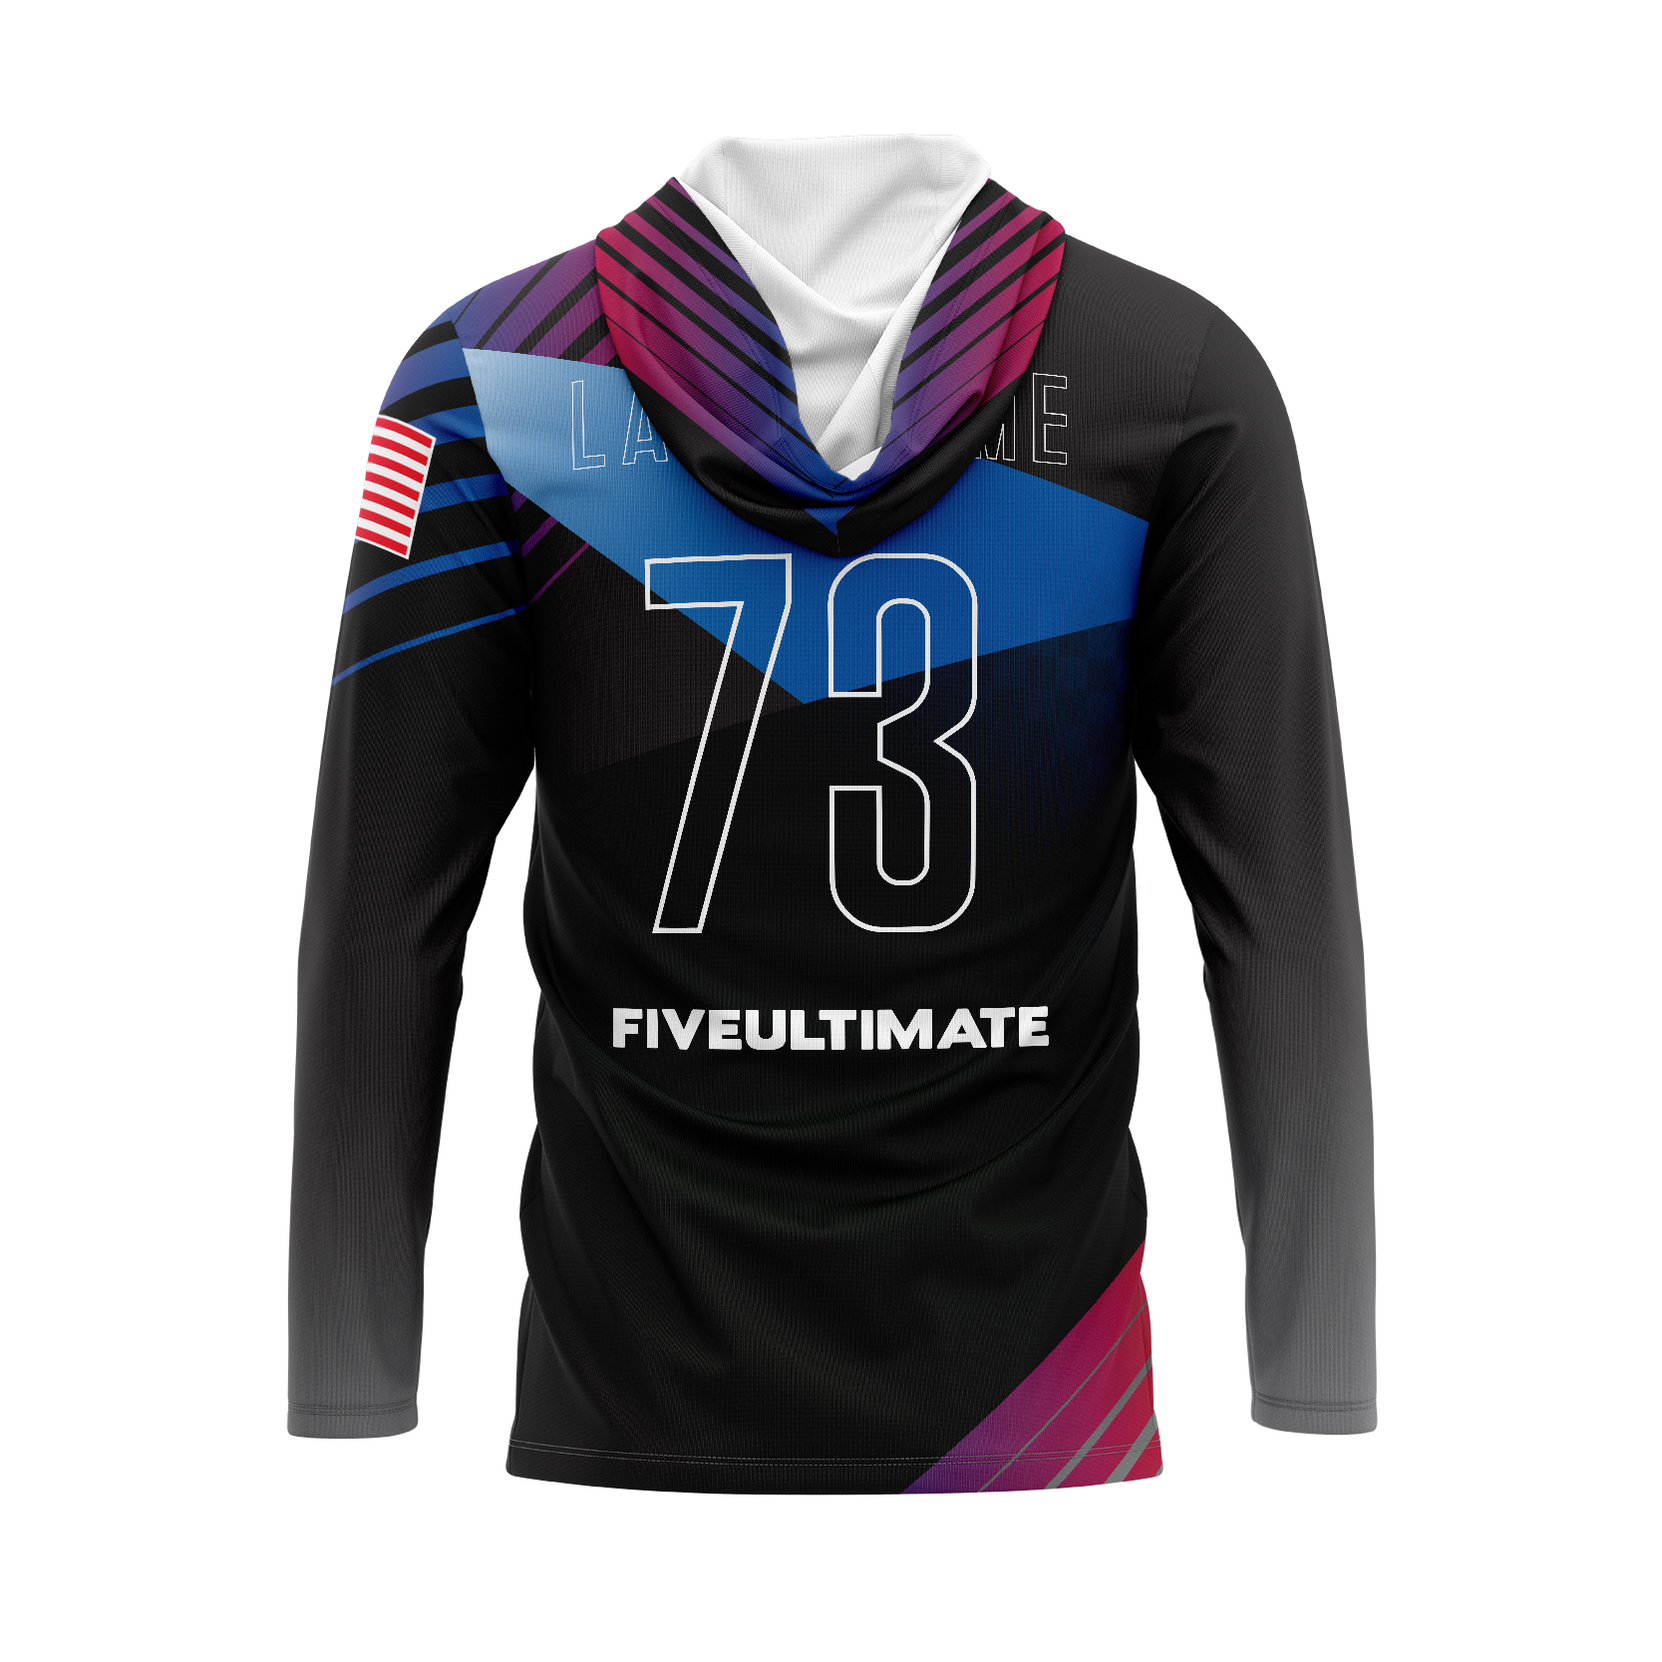 Five Ultimate | Our mission is to serve the Ultimate frisbee community